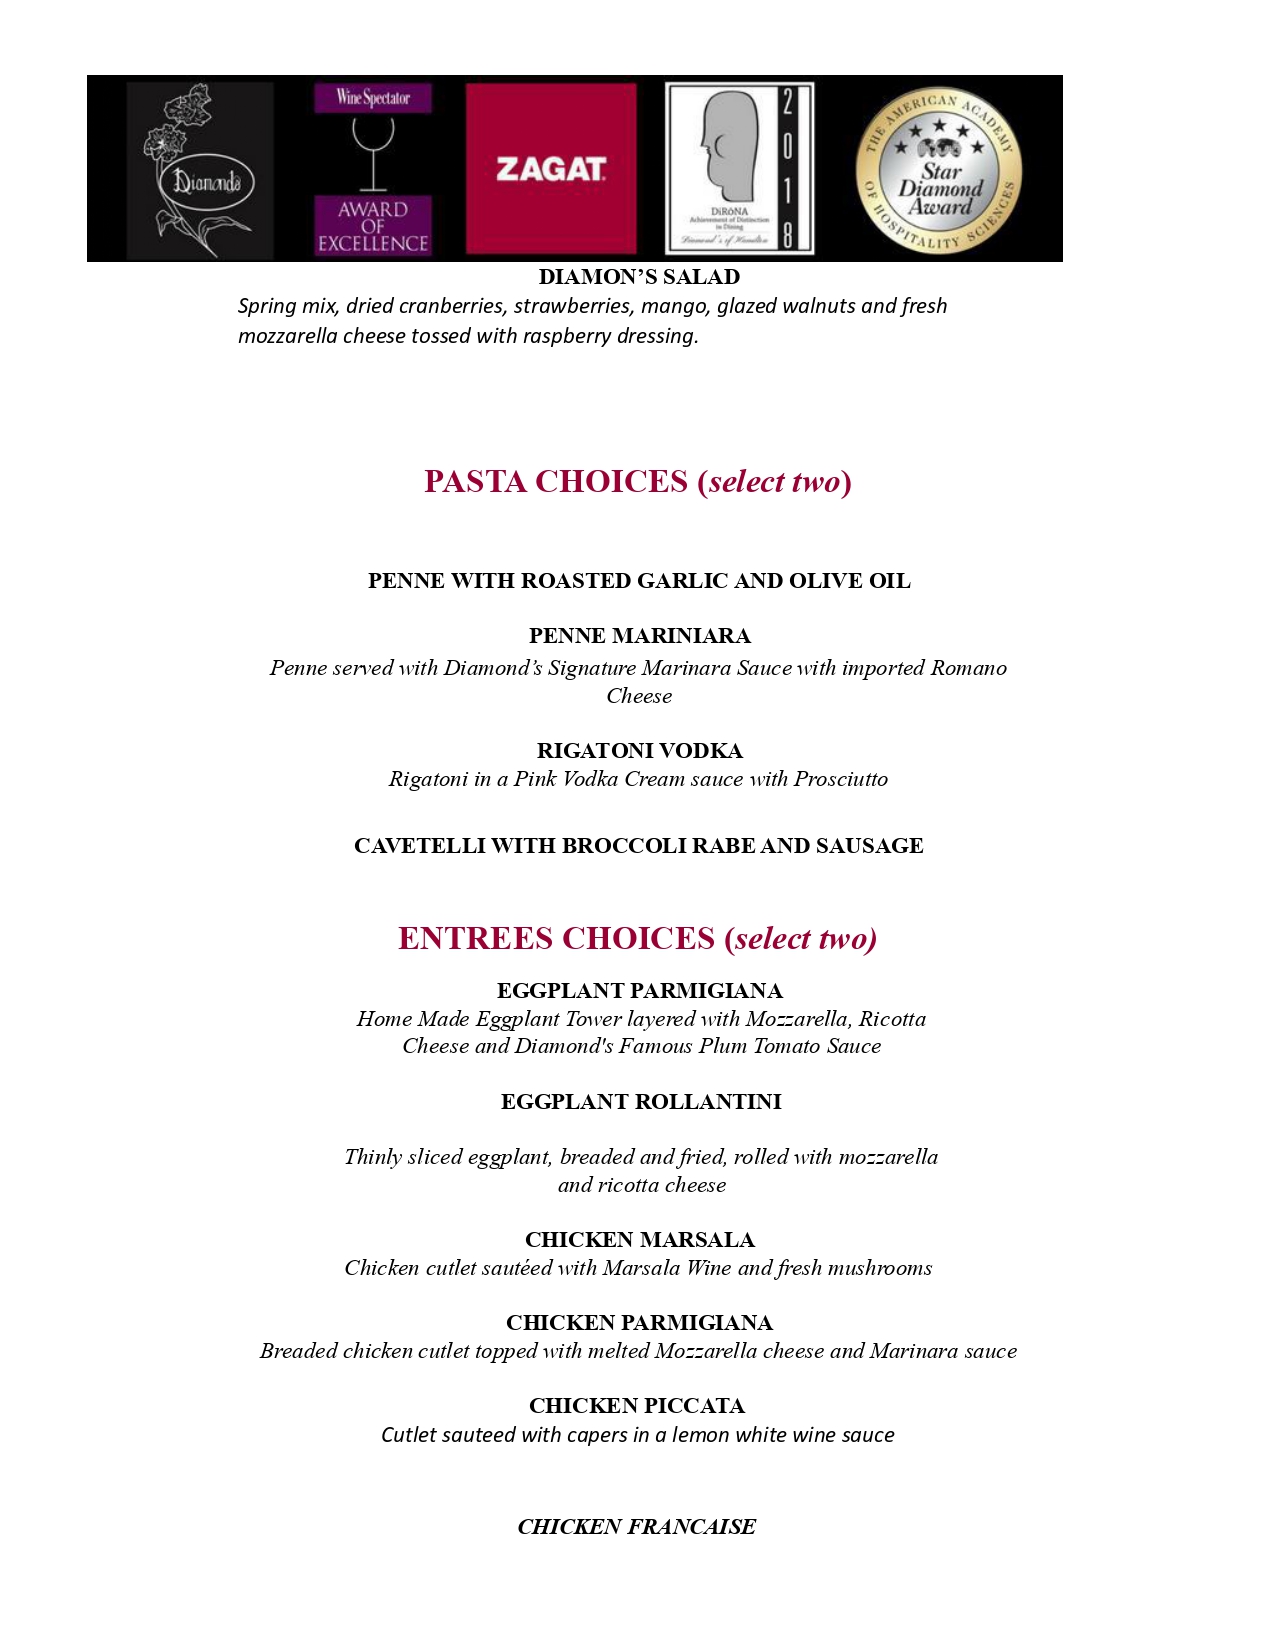 Menu featuring a selection of italian dishes including pasta with raspberry dressing, roasted garlic penne, rigatoni with broccoli, eggplant parmigiana, and chicken dishes.